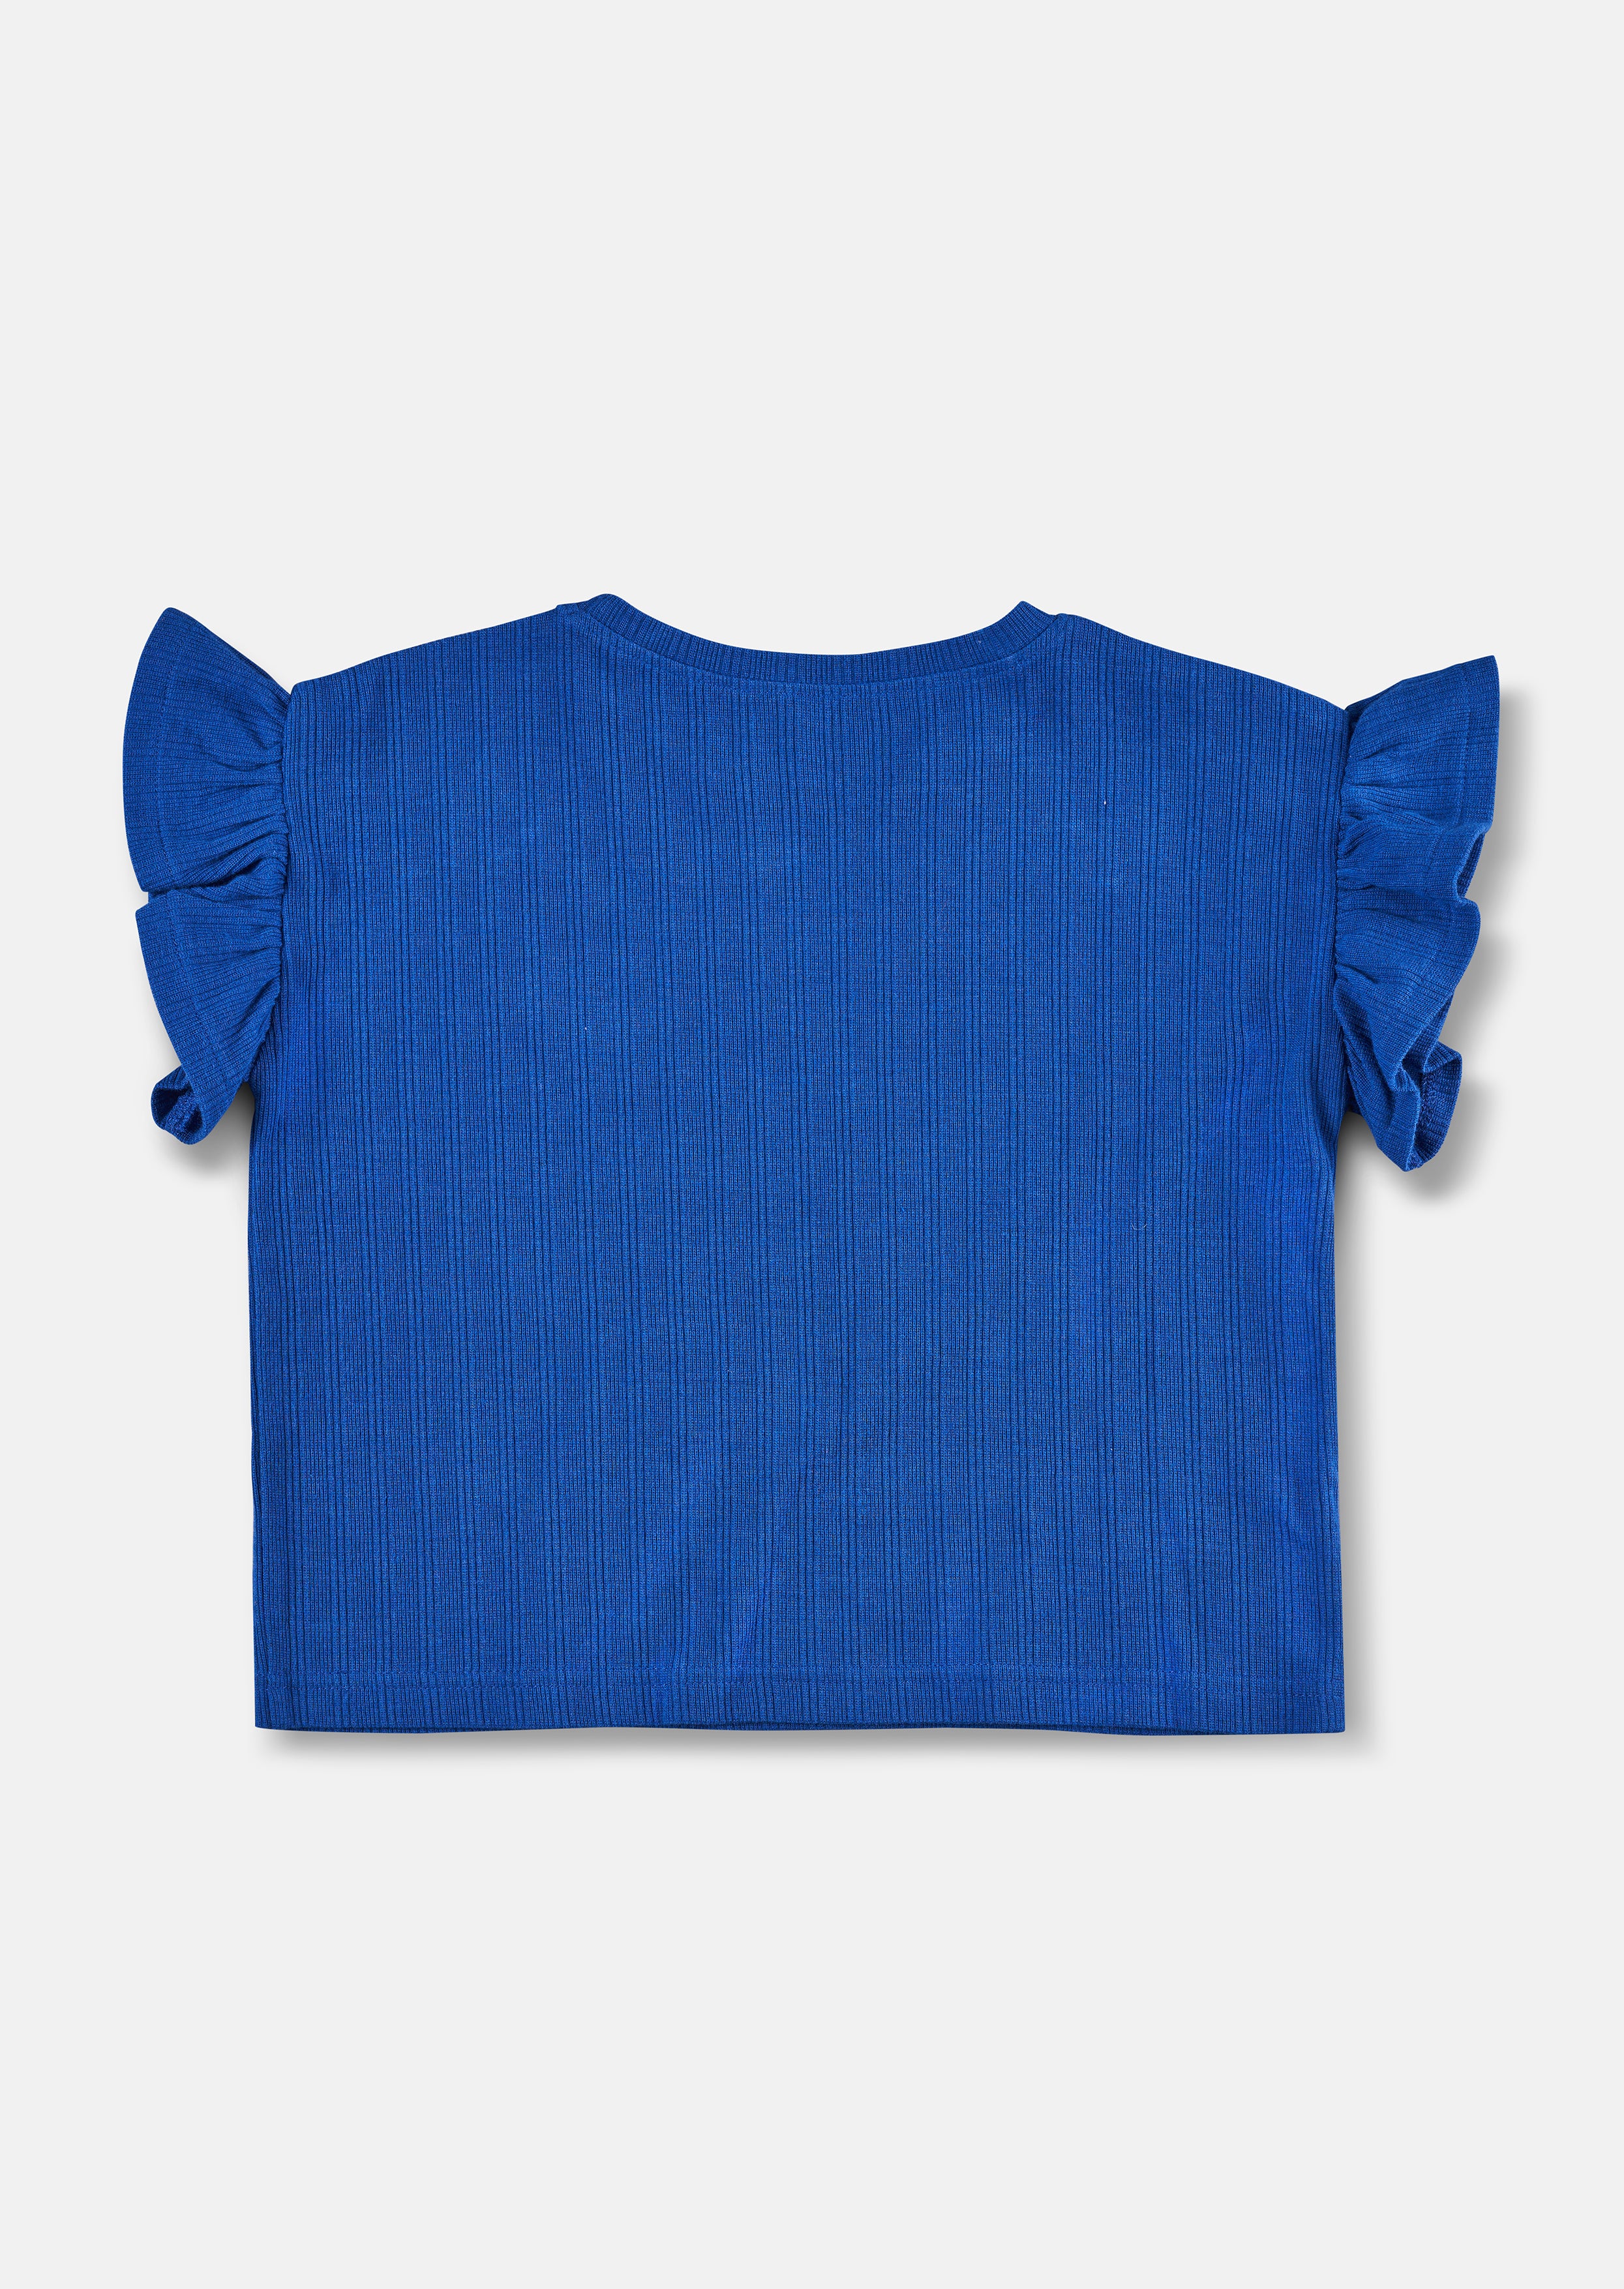 Girls Solid Blue Cotton Top with Frill Sleeves